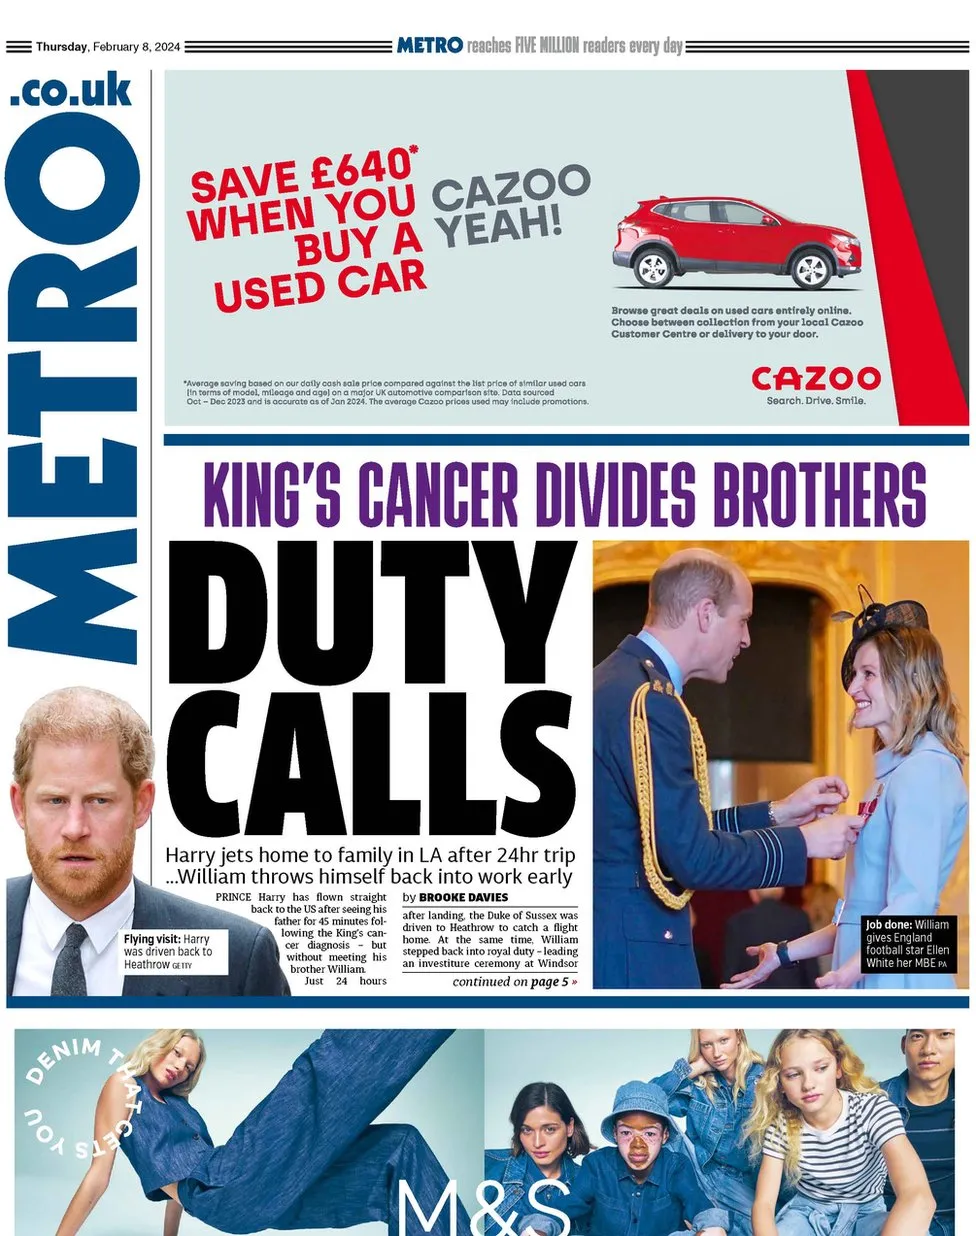 Metro - King’s cancer divides brothers: Duty calls 